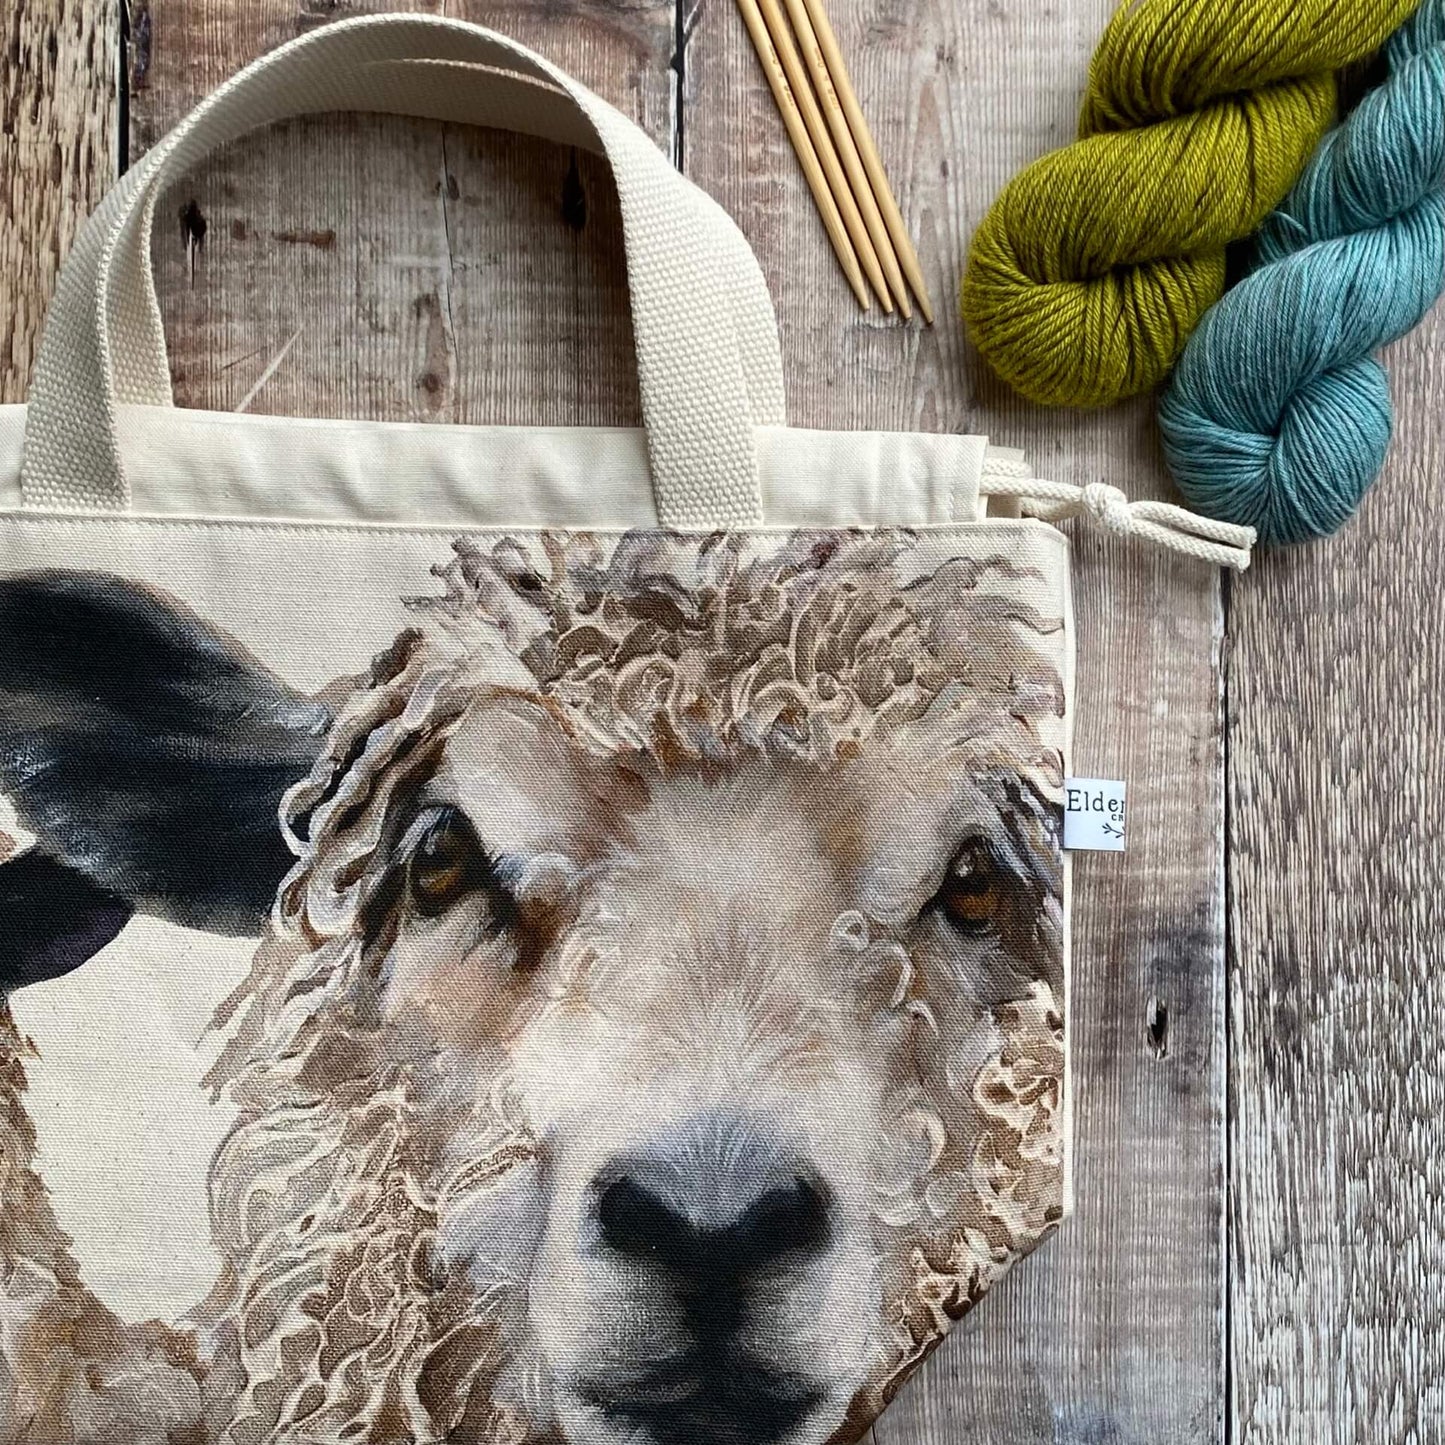 A knitting project bag featuring large sheep faces sits on a wooden table next to knitting needles and yarn. The face of one of the sheep stares up at the viewer. 